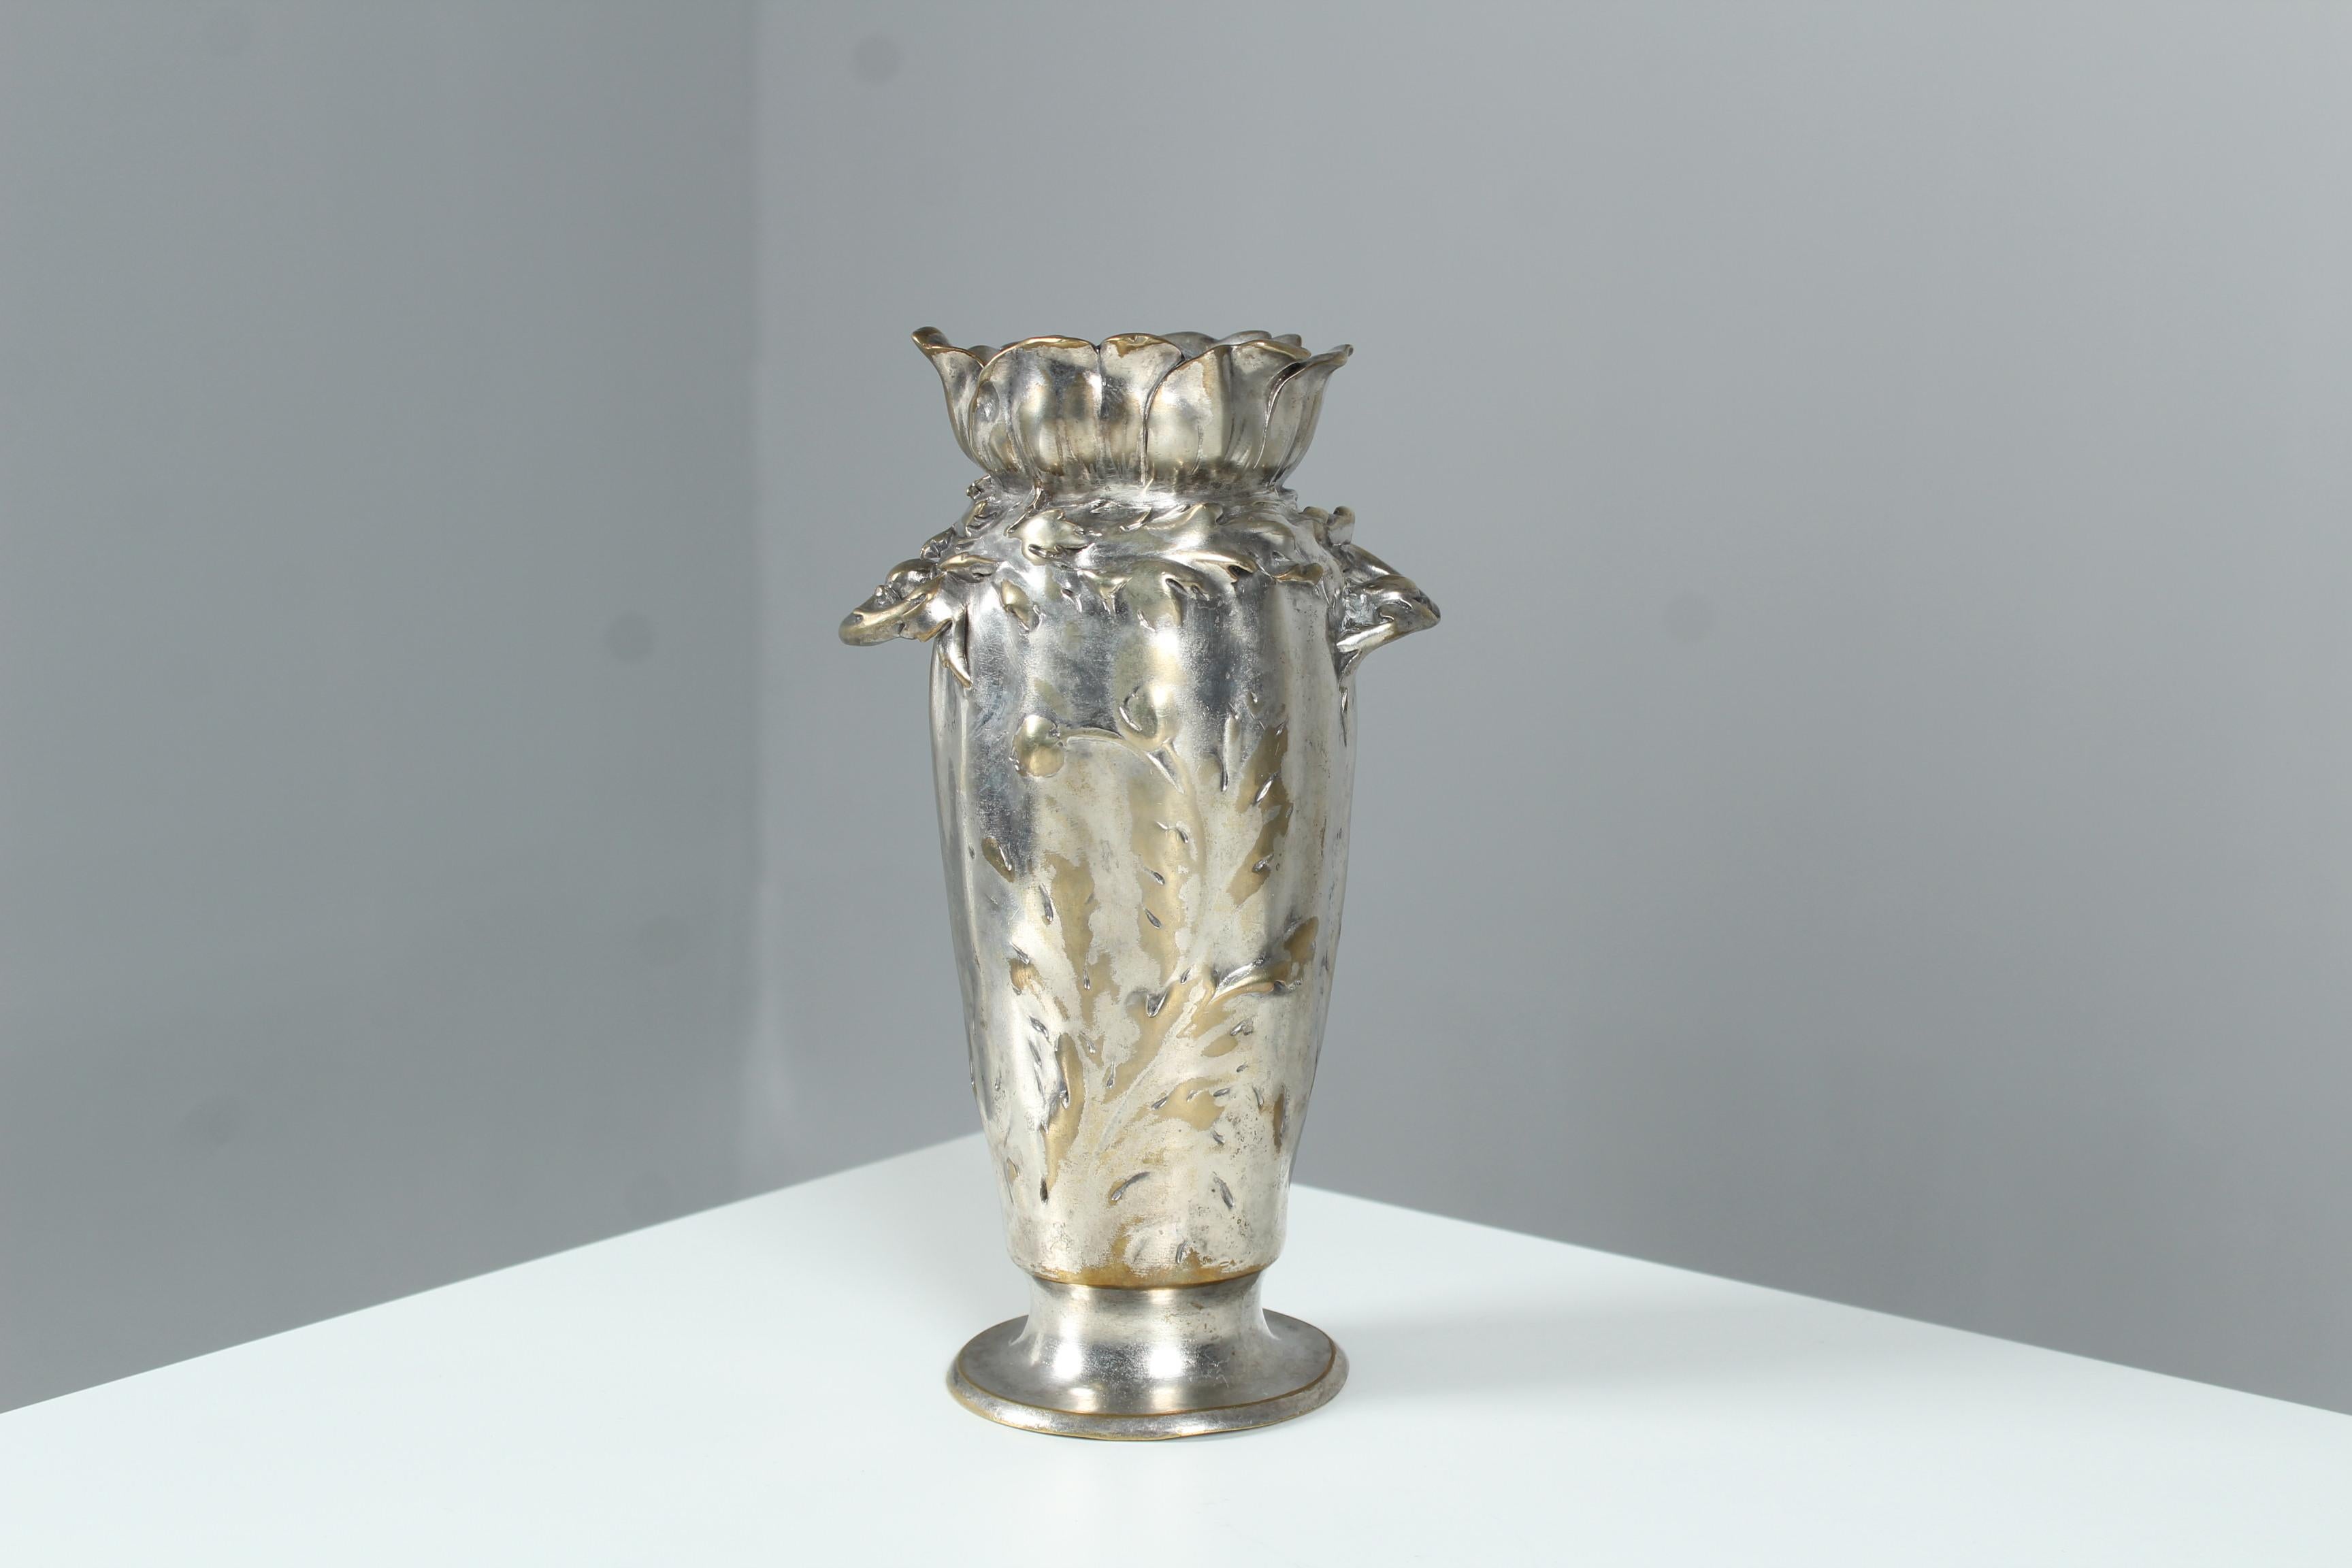 Beautiful antique vase by the french sculptor Eugène Lelièvre (March 13th 1856 - January 24th 1945).
Exceptional silver plated bronze work.
The top of the vase is depicted as a flower with beautifully executed petals. Around the vase are plain